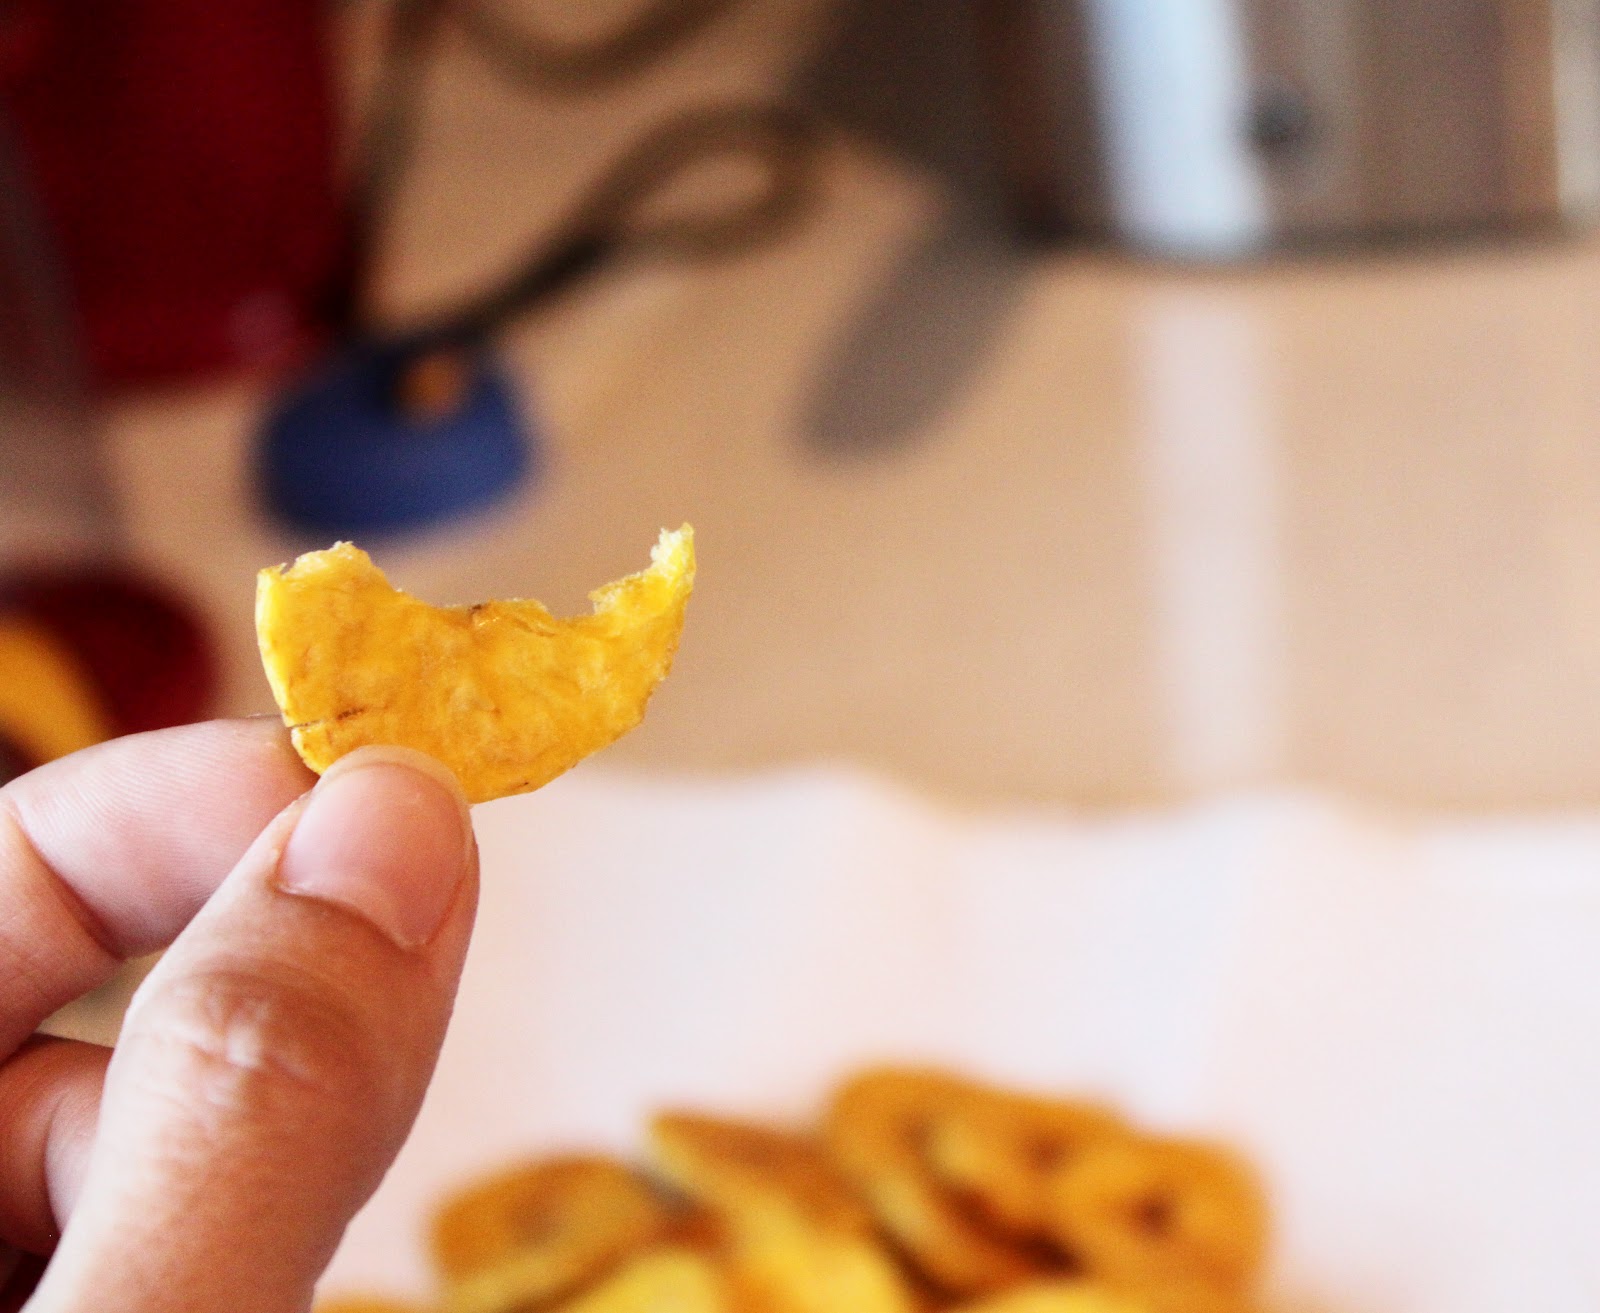 Fried Plantain Chips Recipe